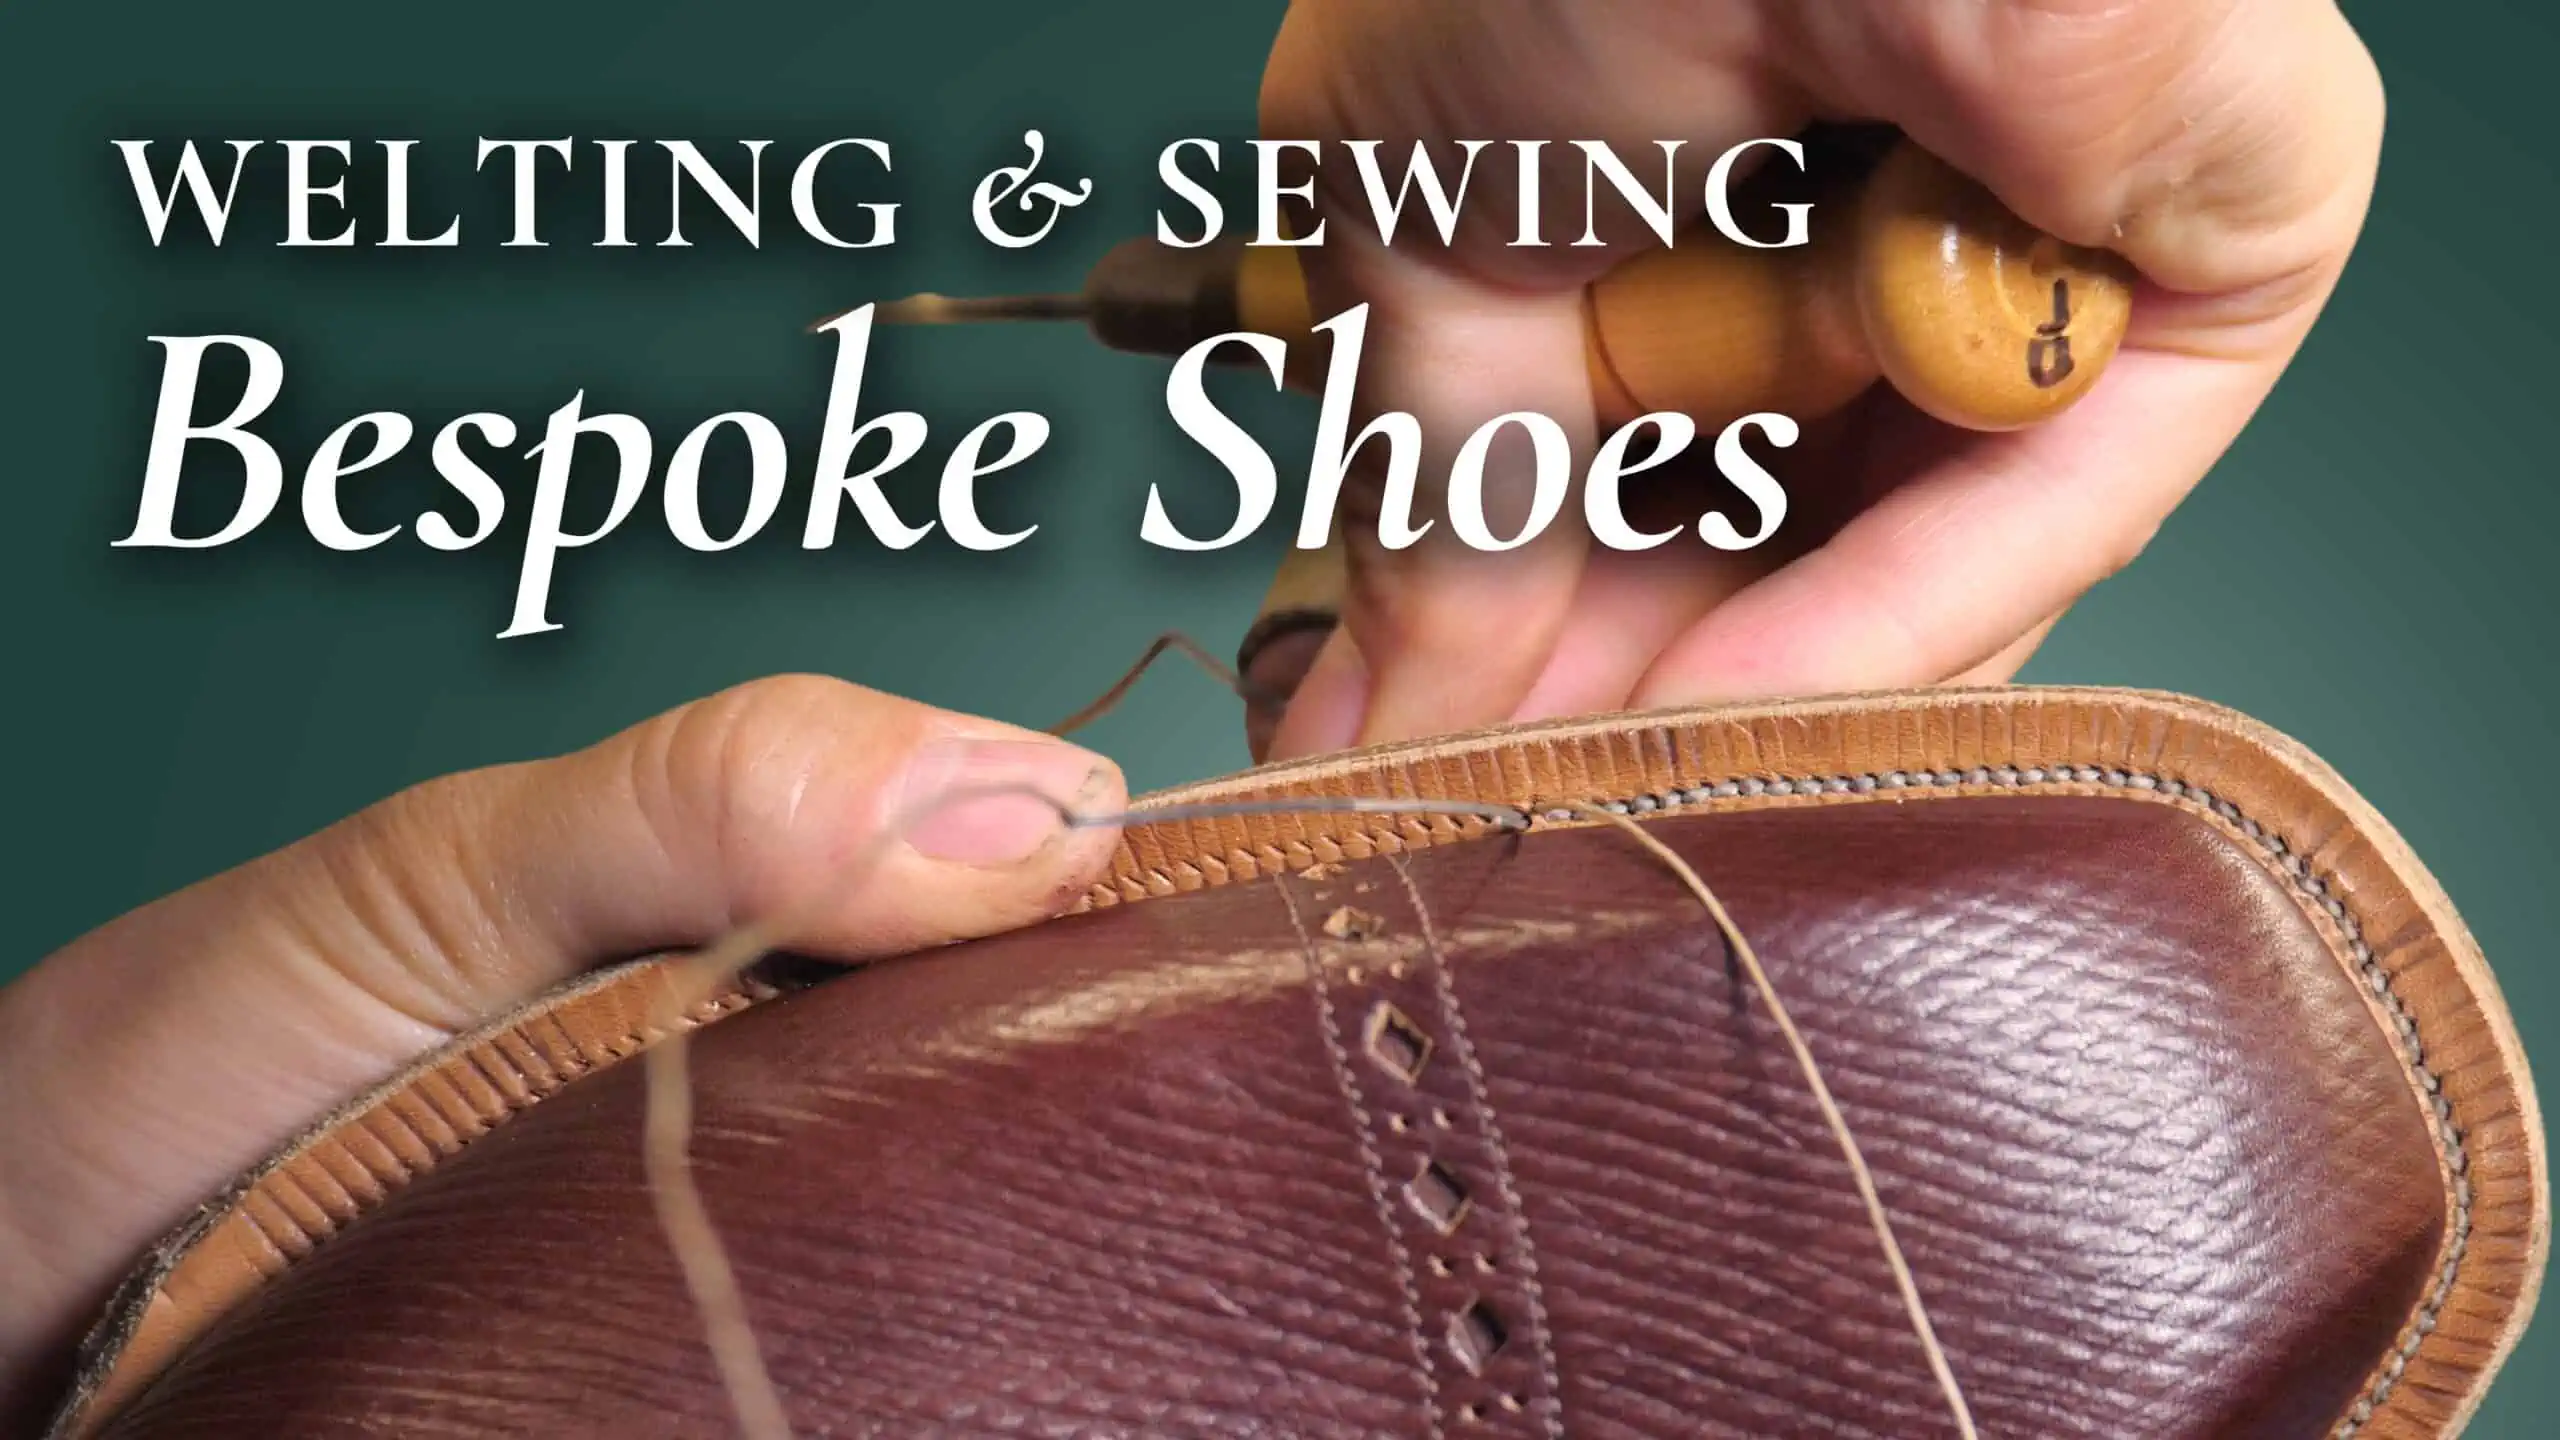 Learn how to invisibly fix a hole on your shoe / keep your shoes in good  condition 